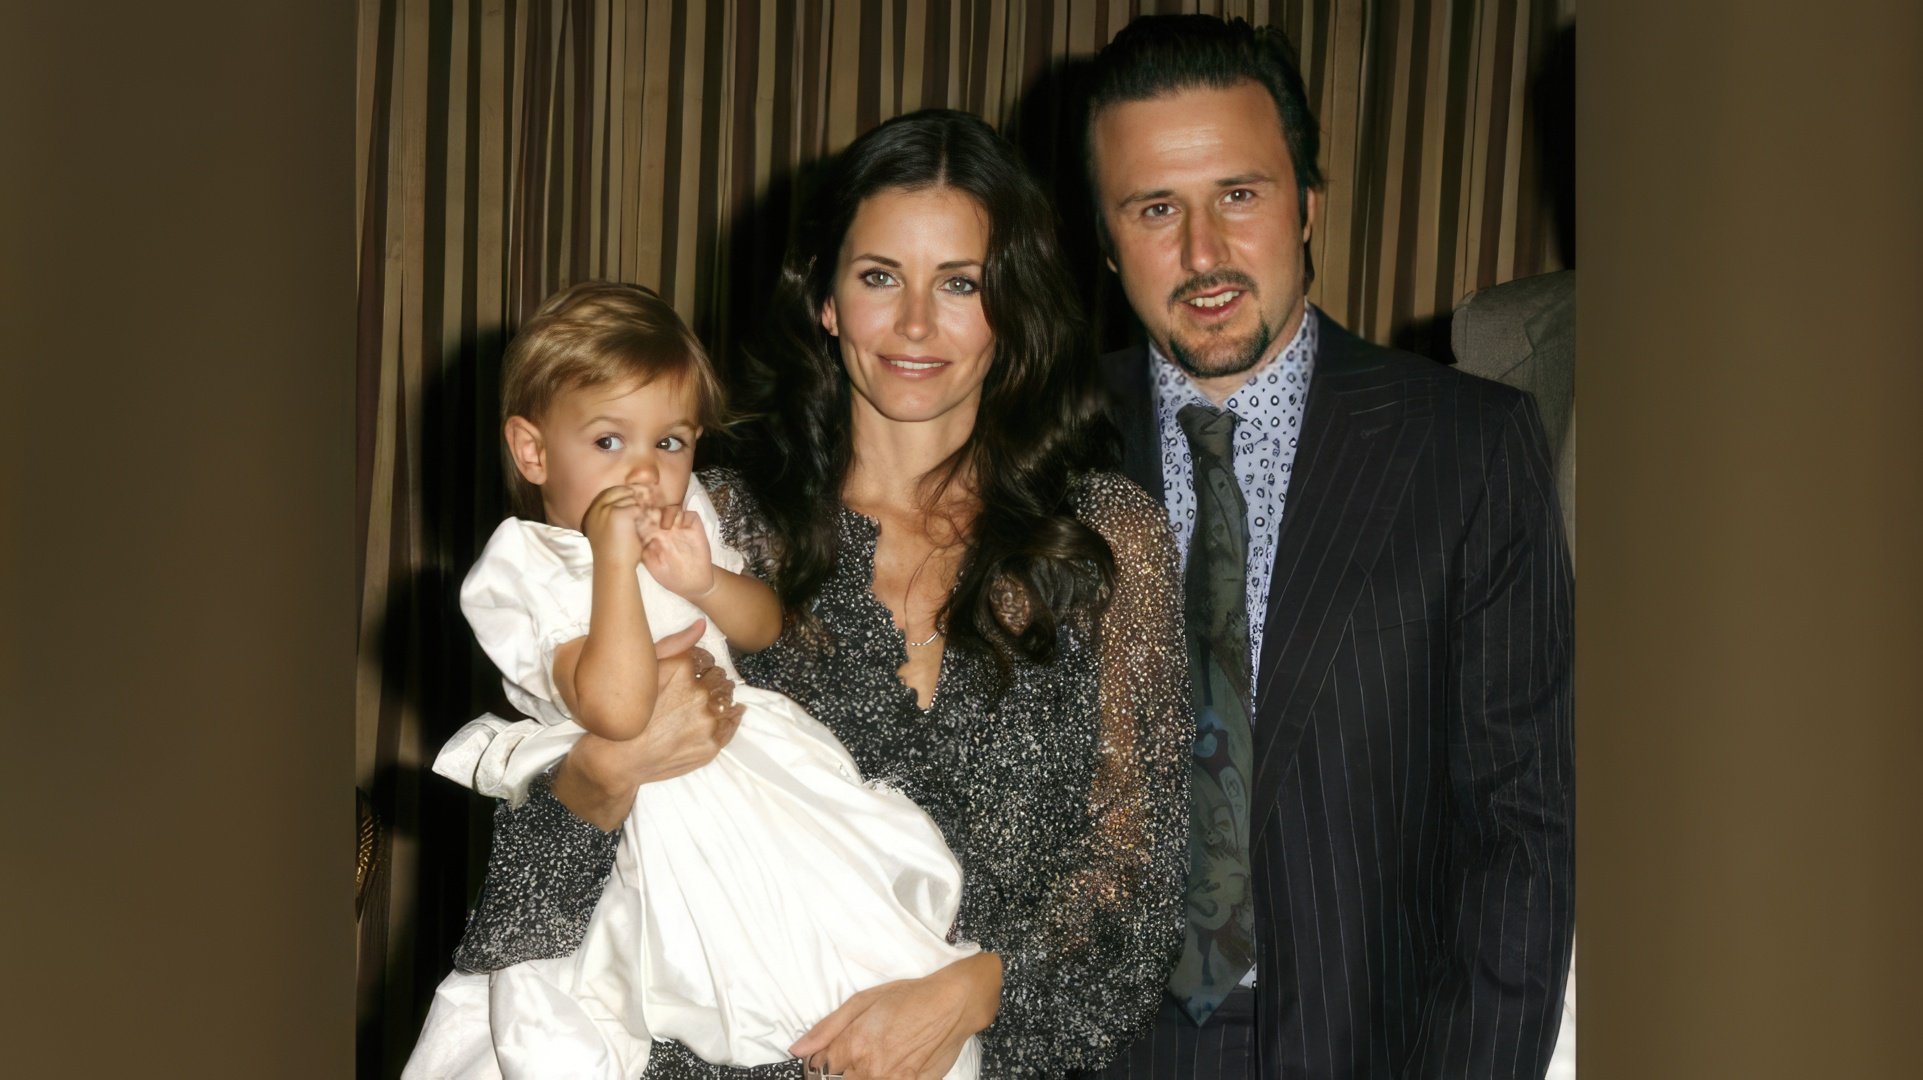 Courteney Cox with her husband and daughter